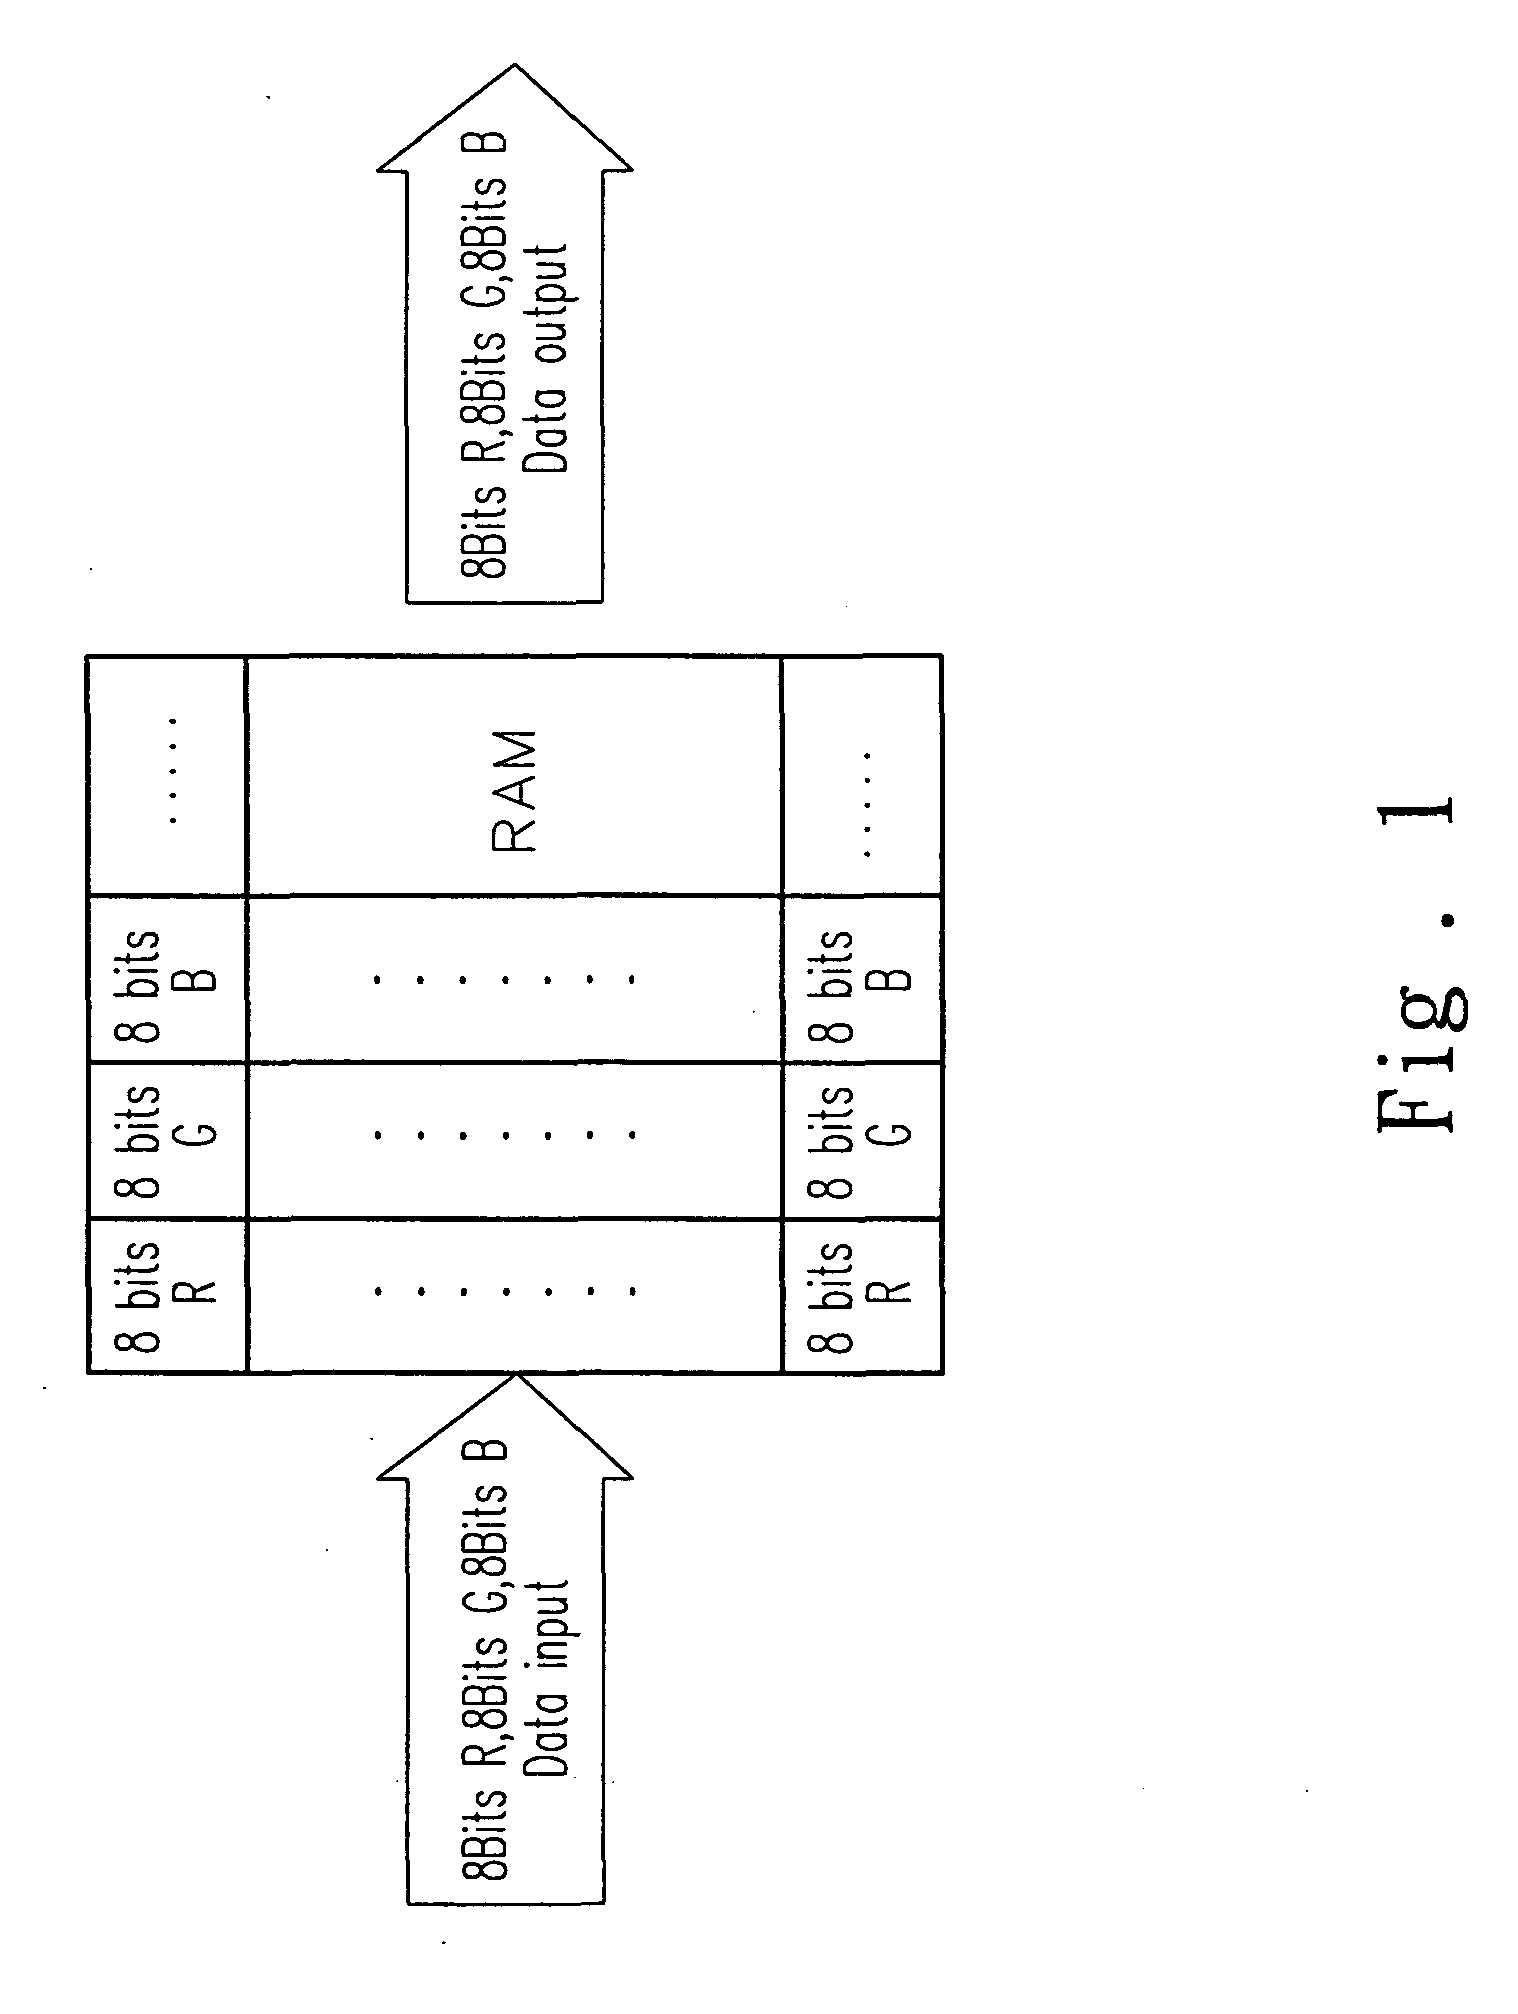 Method for reducing random access memory of IC in display devices